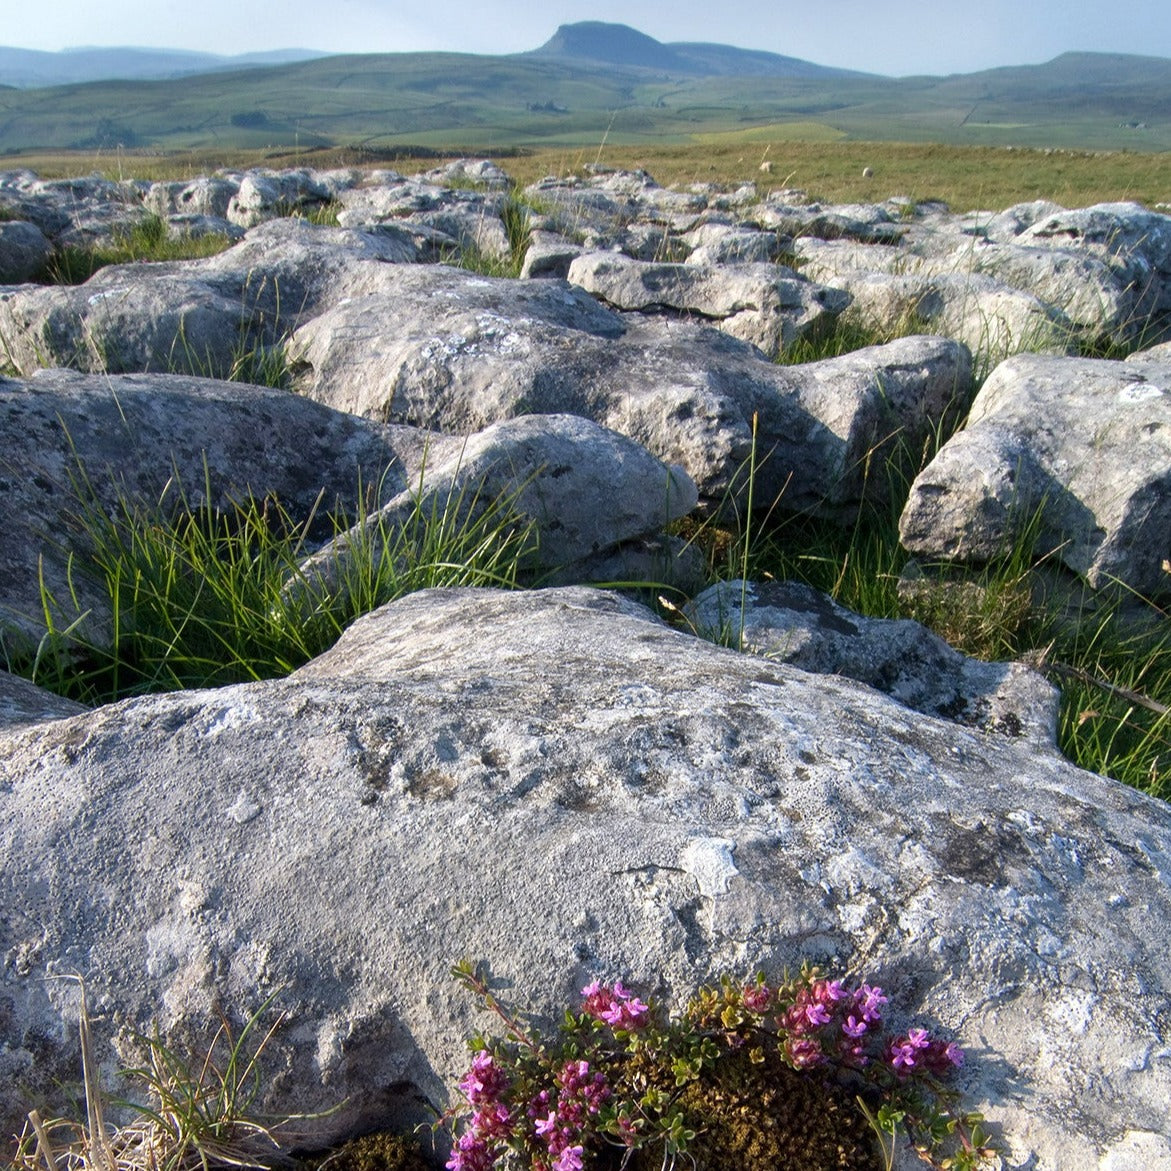 Adopt an Acre: Winskill Stones, North Yorkshire